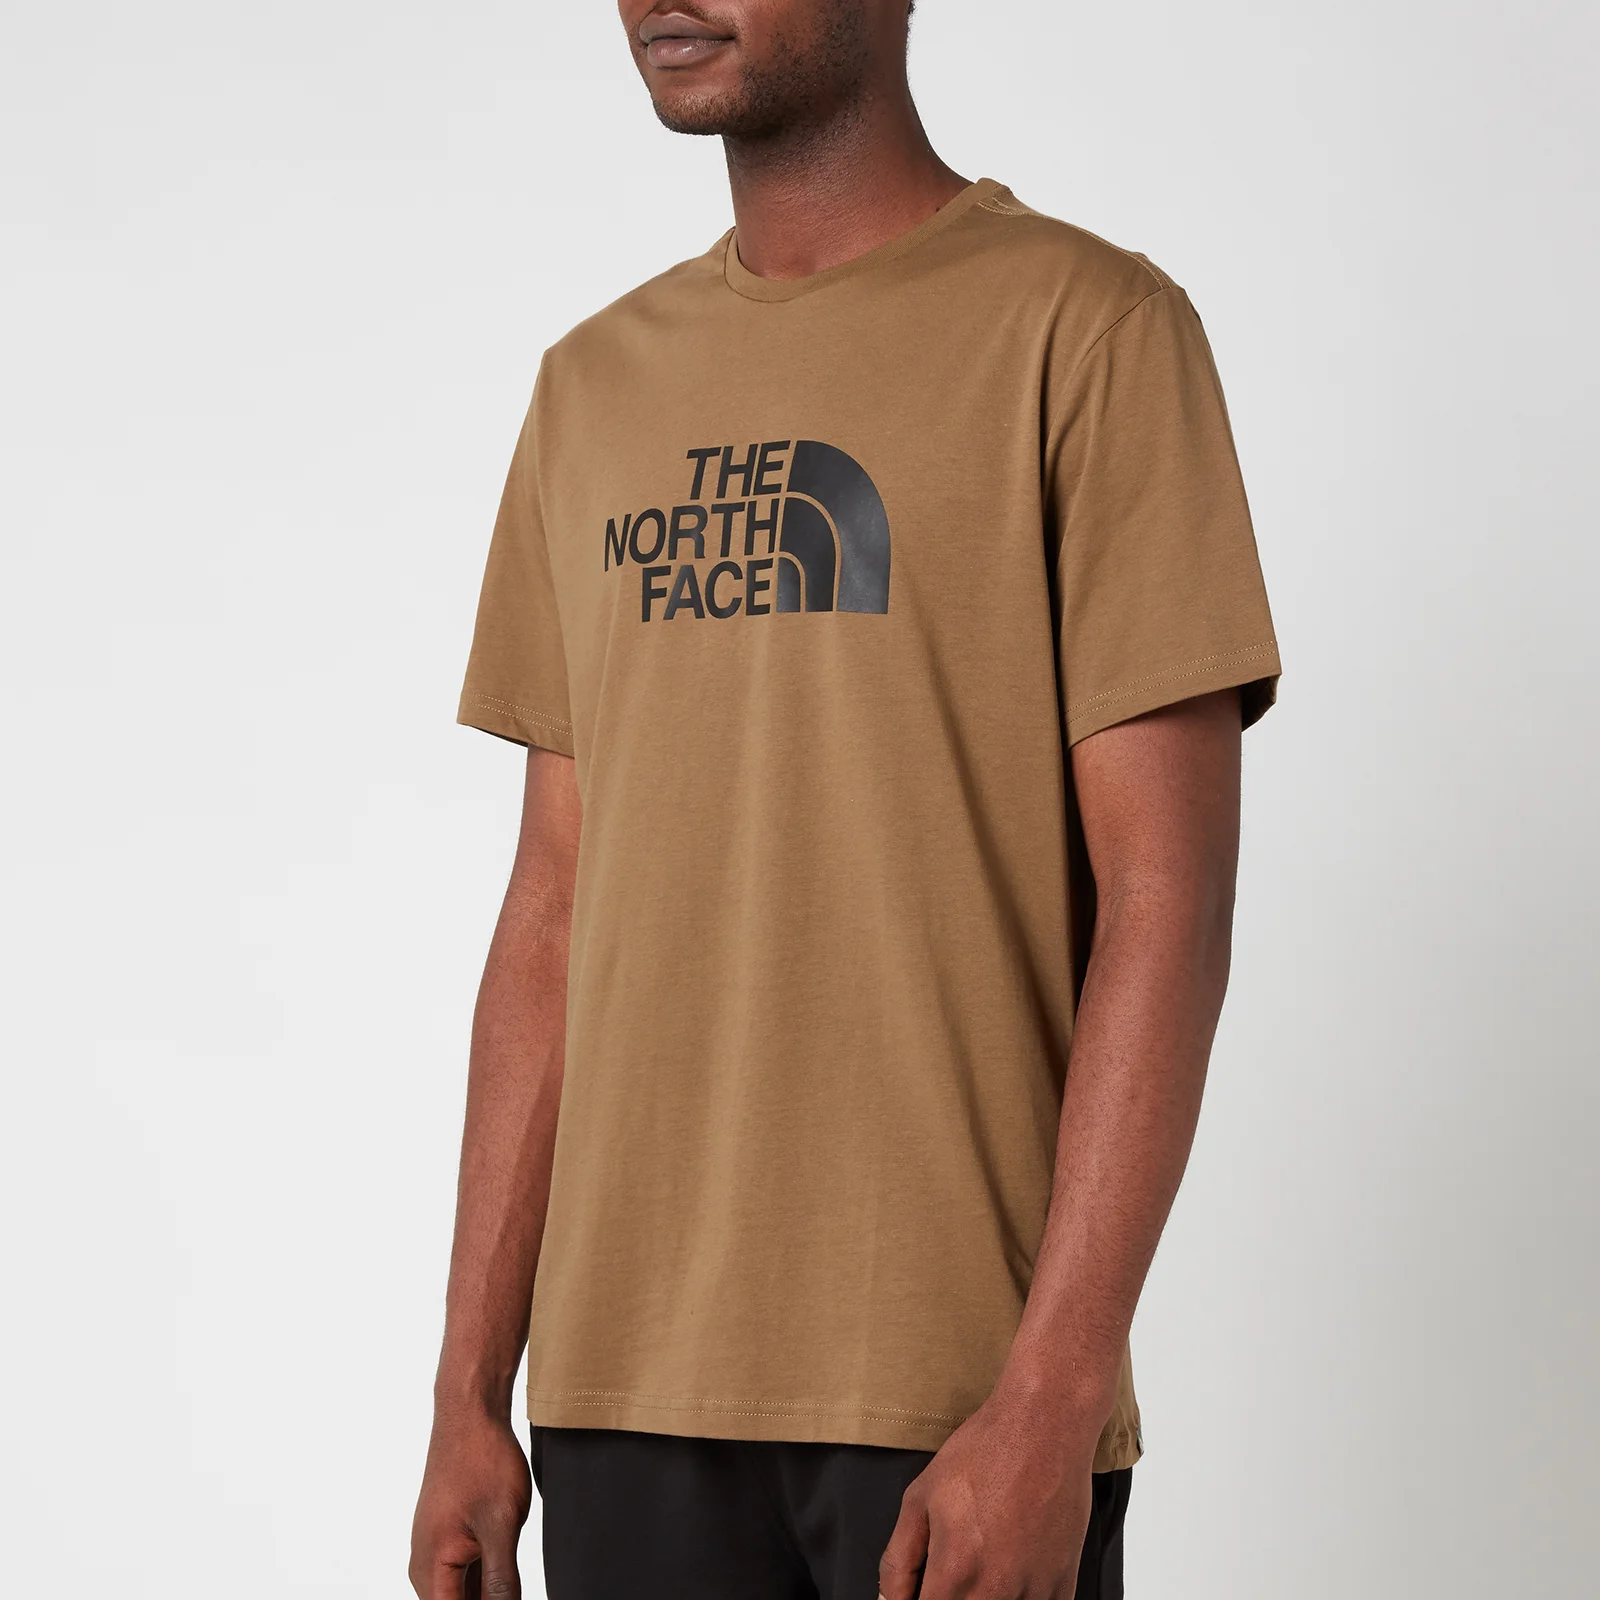 The North Face Men's Easy Eu Short Sleeve T-Shirt - Military Olive Image 1